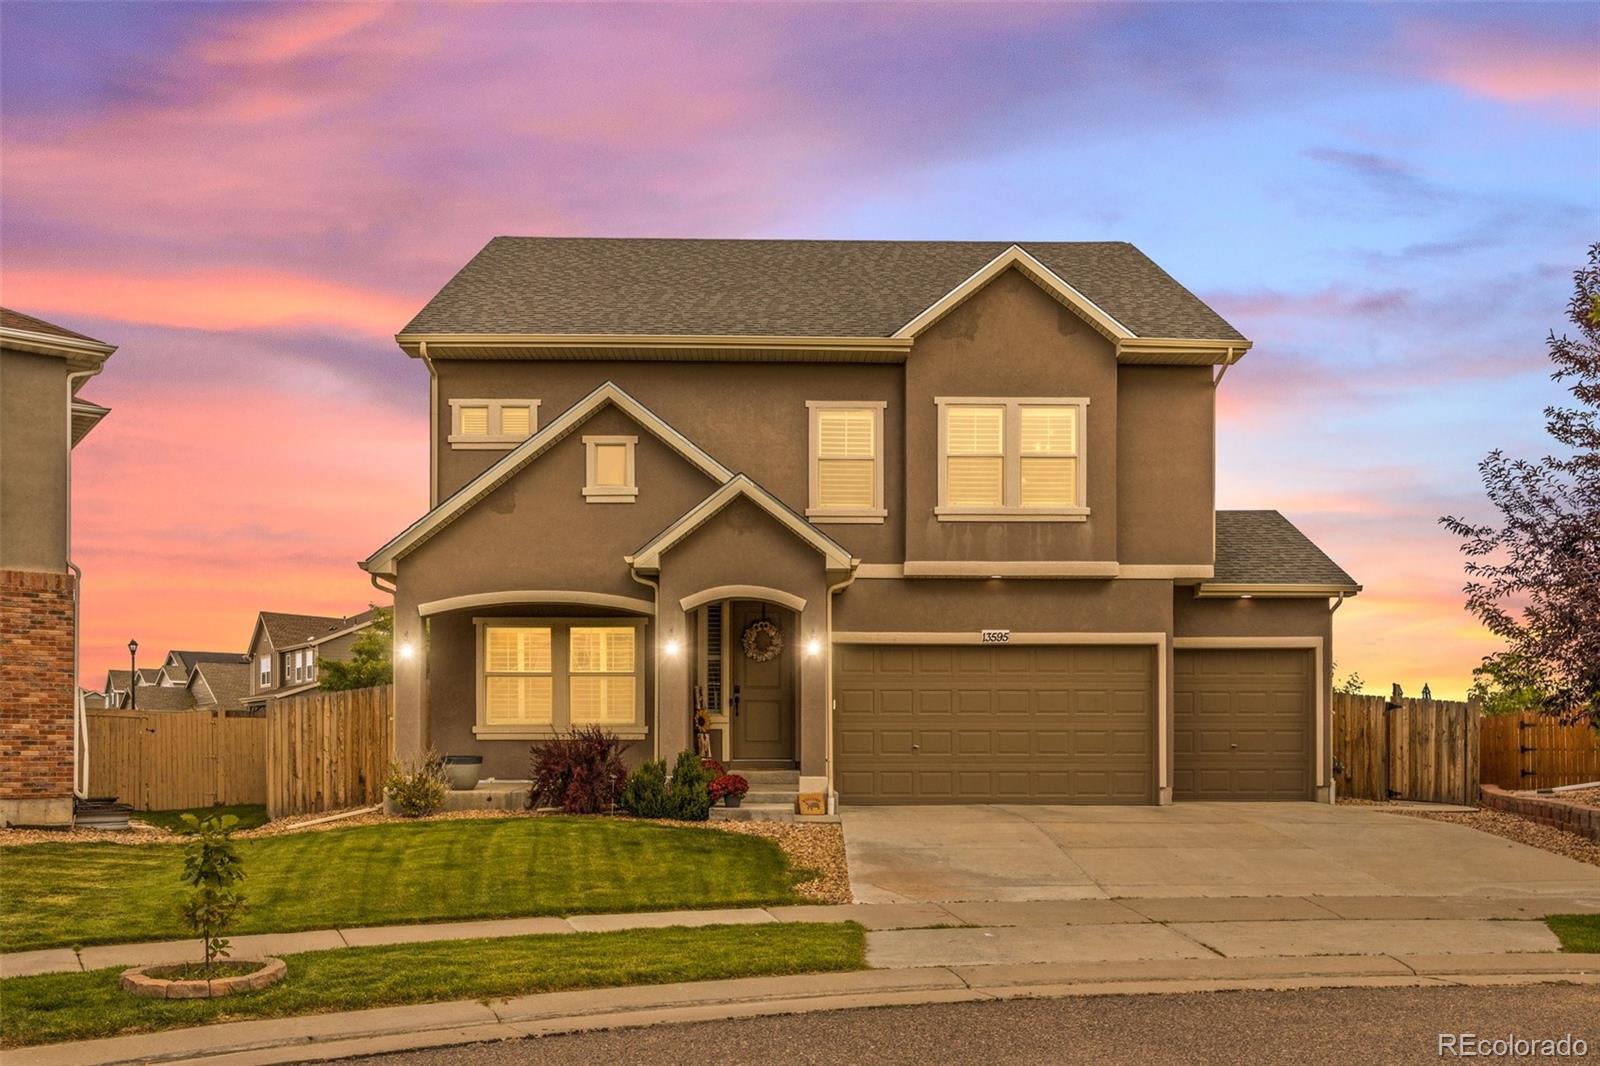 13595 E 107th Place, commerce city MLS: 4263413 Beds: 5 Baths: 4 Price: $700,000